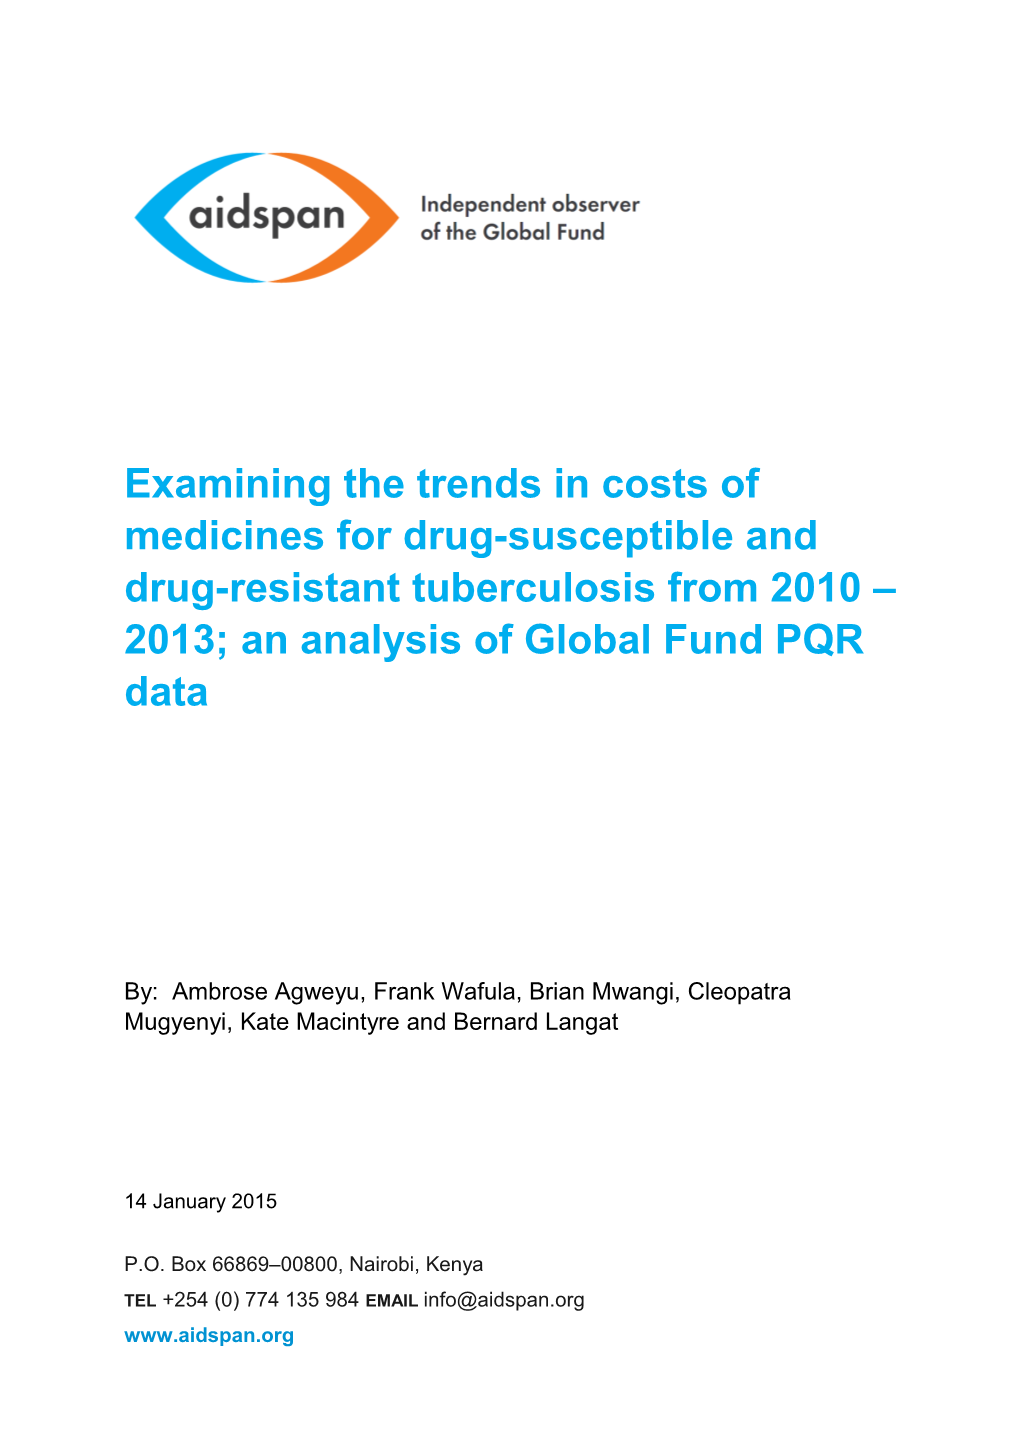 Examining the Trends in Costs of Medicines for Drug-Susceptible and Drug-Resistant Tuberculosis